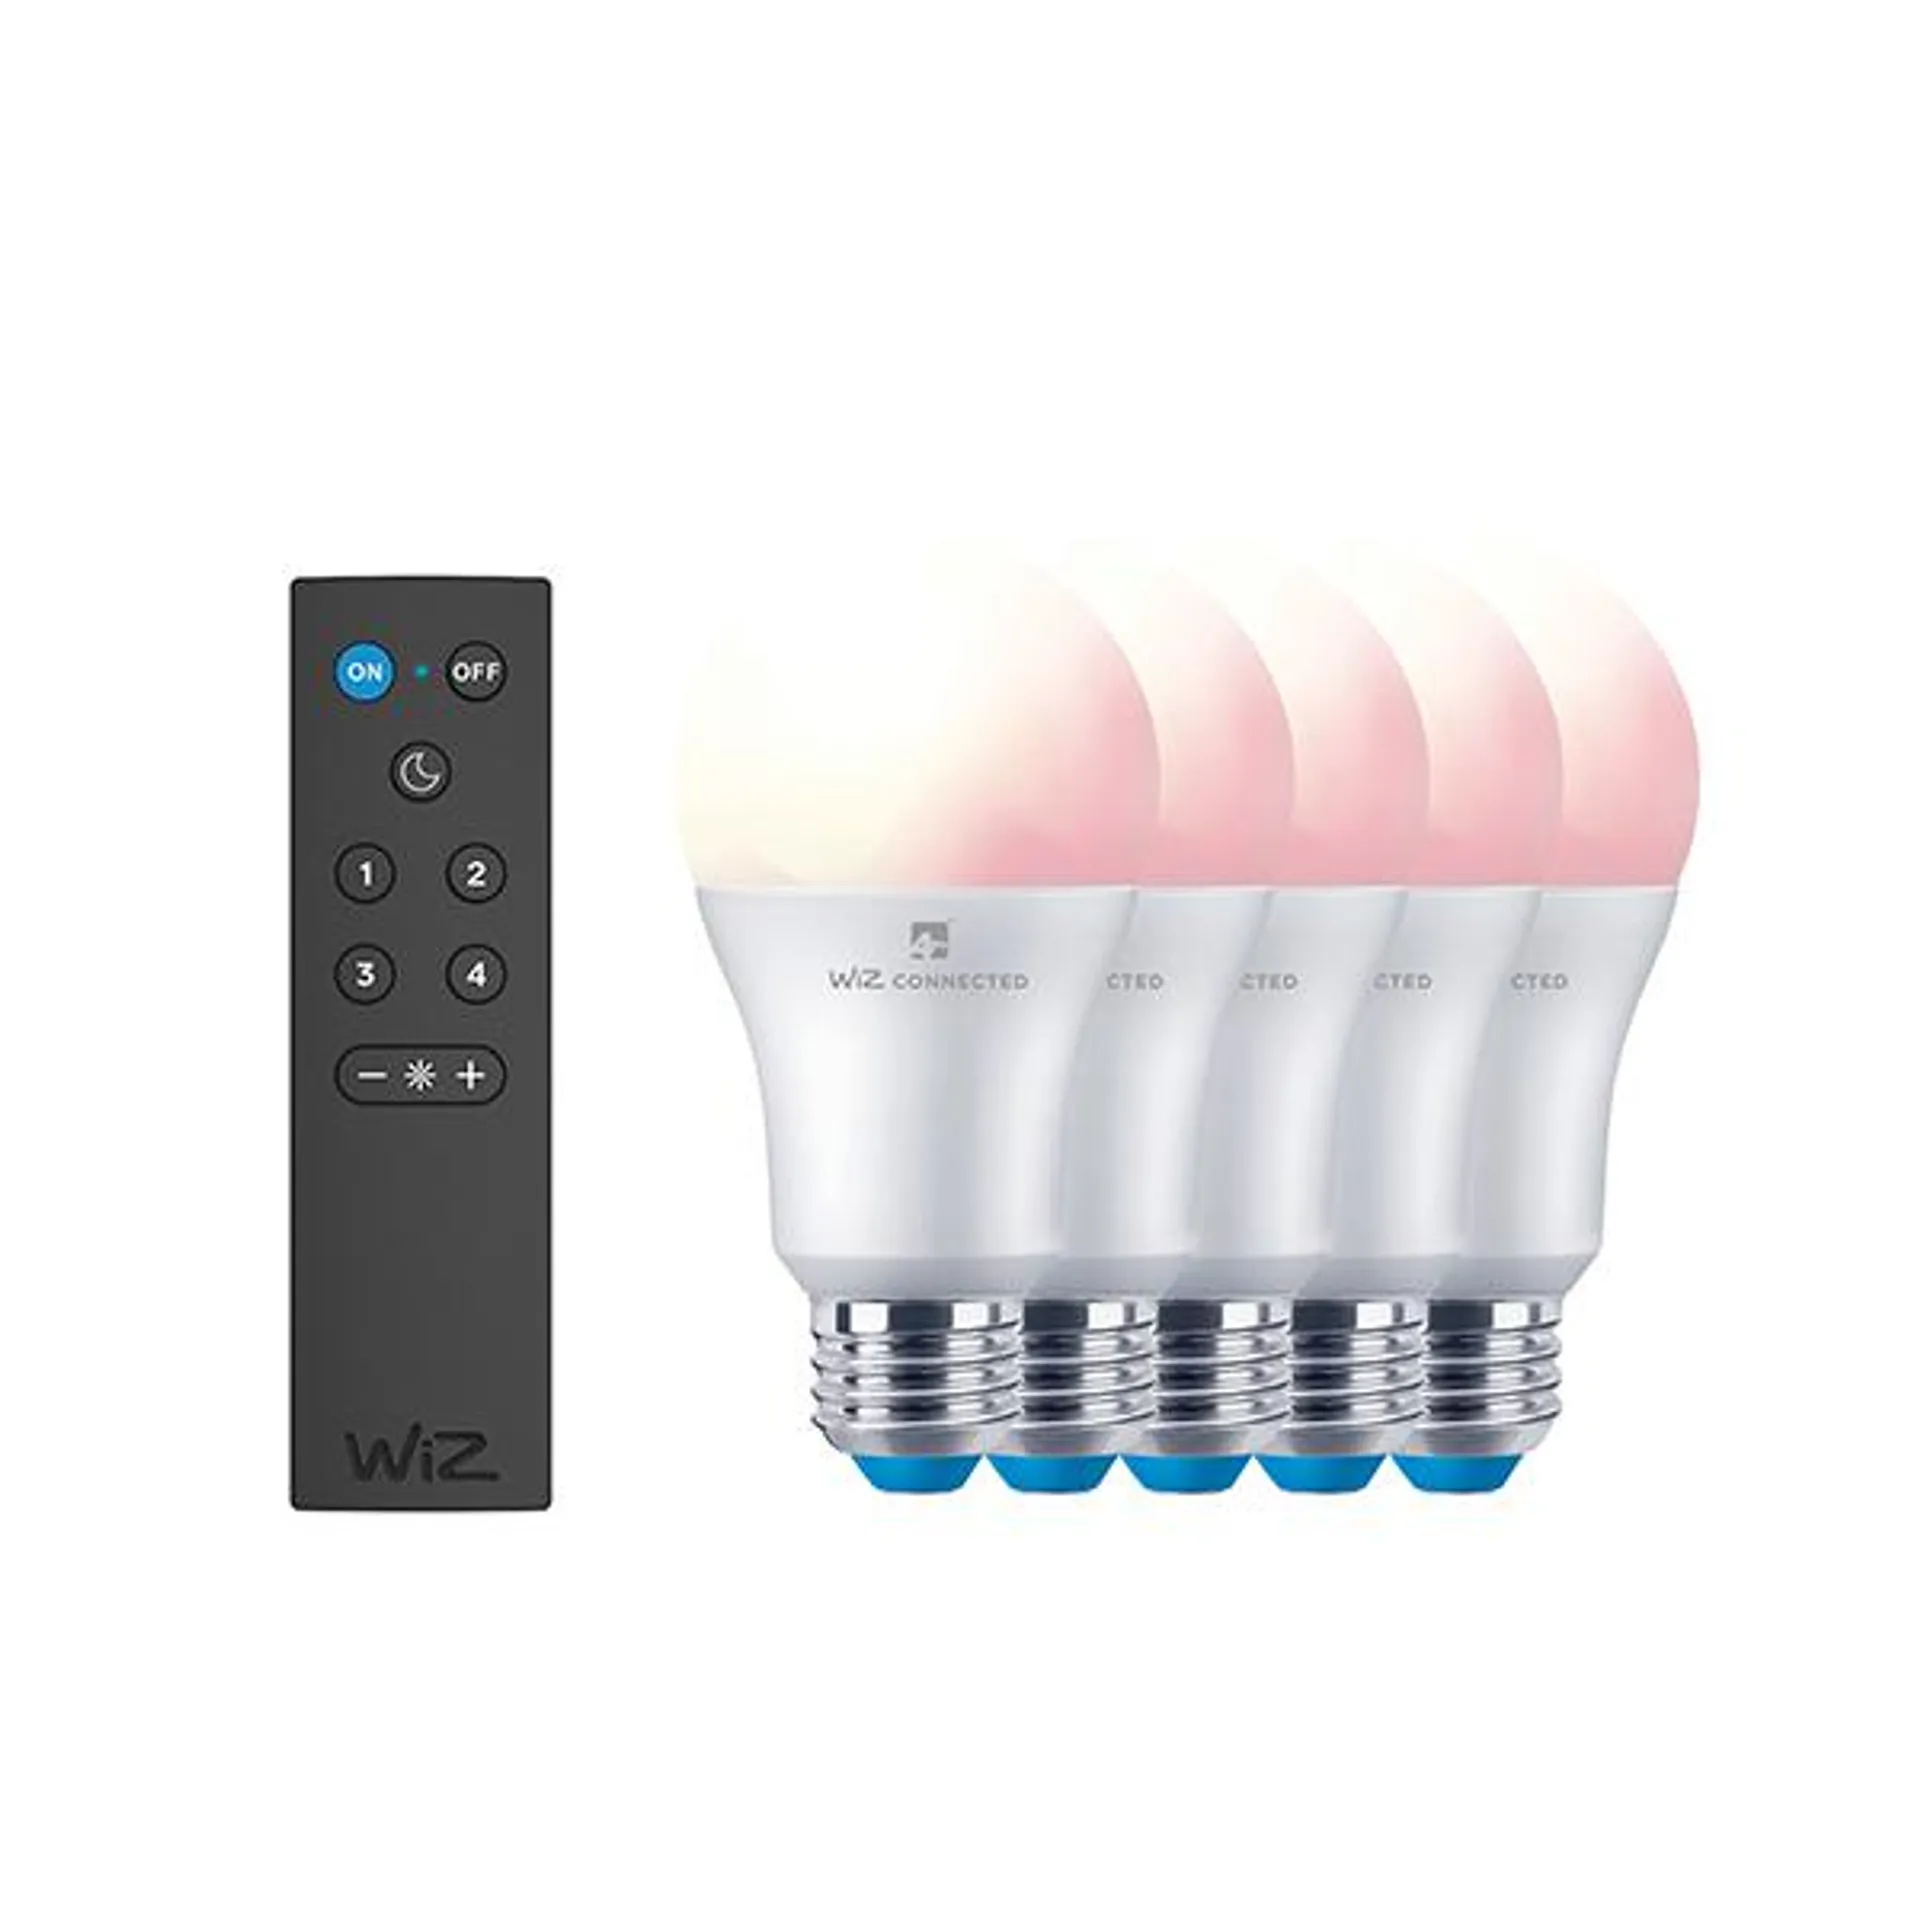 WiZ Smart White and Full Colour Light Bulb with WiFi and Bluetooth Connectivity Base Package - 5 x Light Bulbs & 1 x Remote